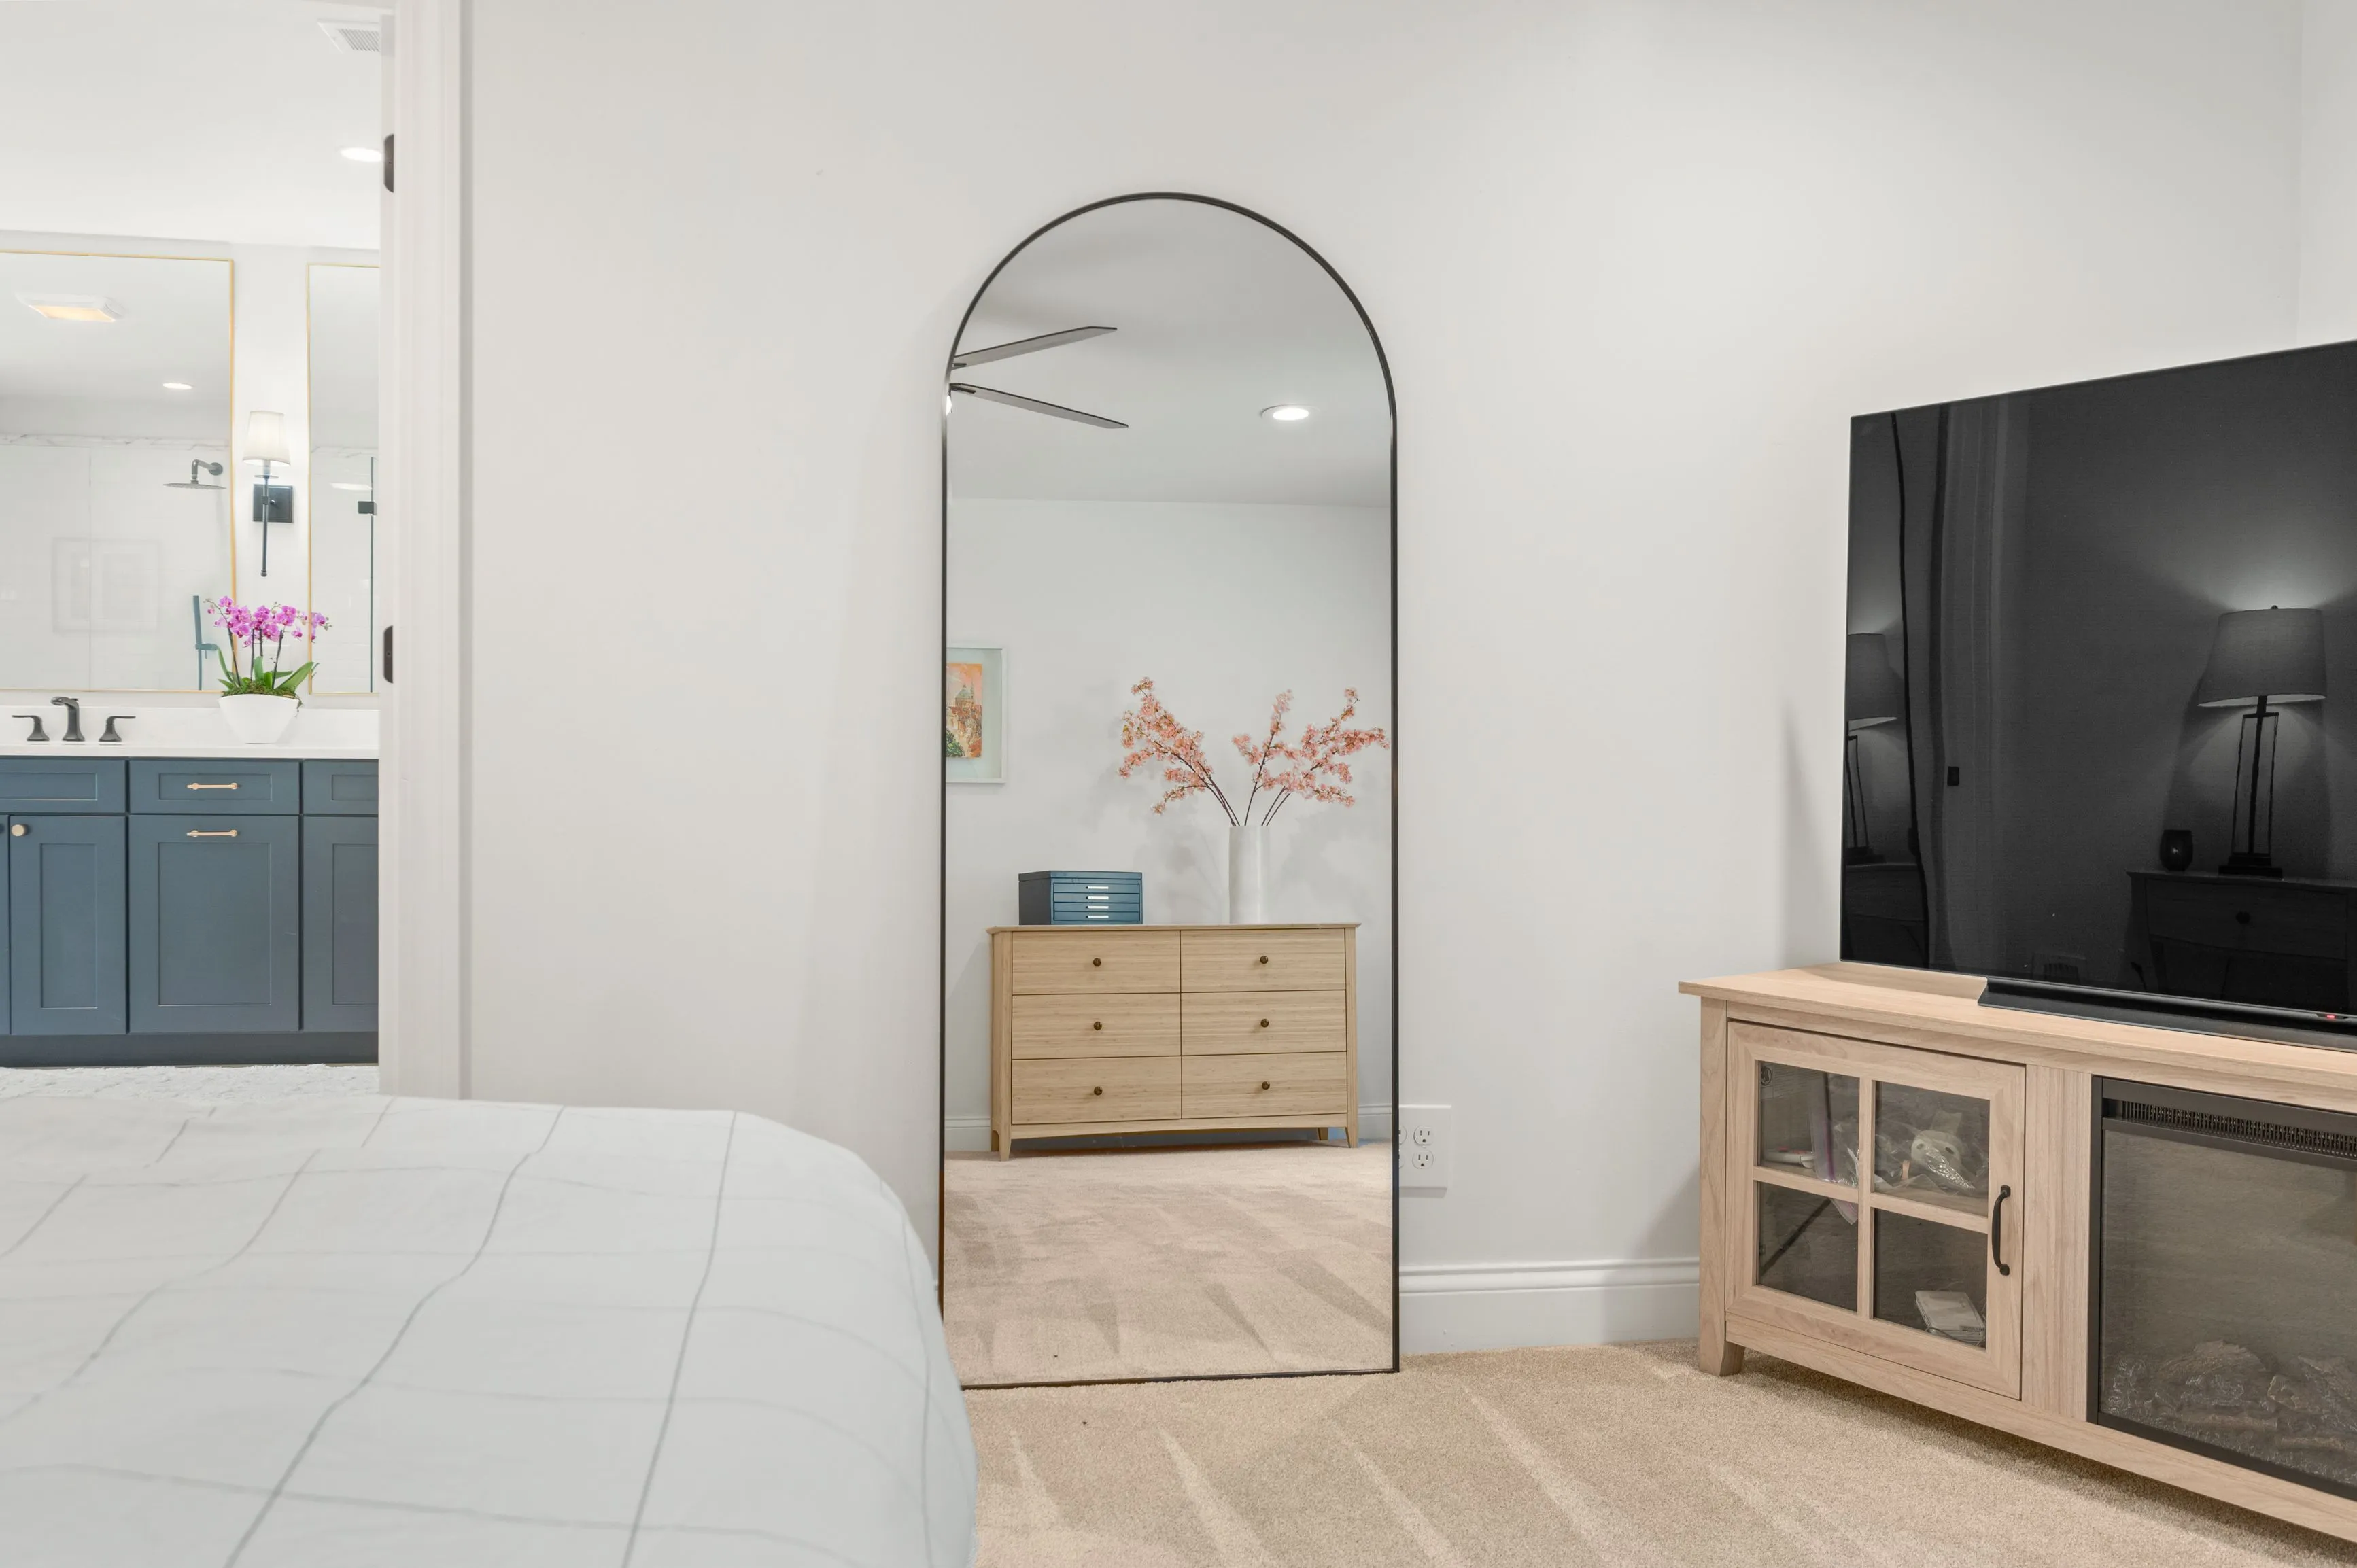 Modern bedroom interior with a wooden dresser, arch mirror, television and a glimpse into the adjoining bathroom with blue cabinets and pink flowers on the vanity.